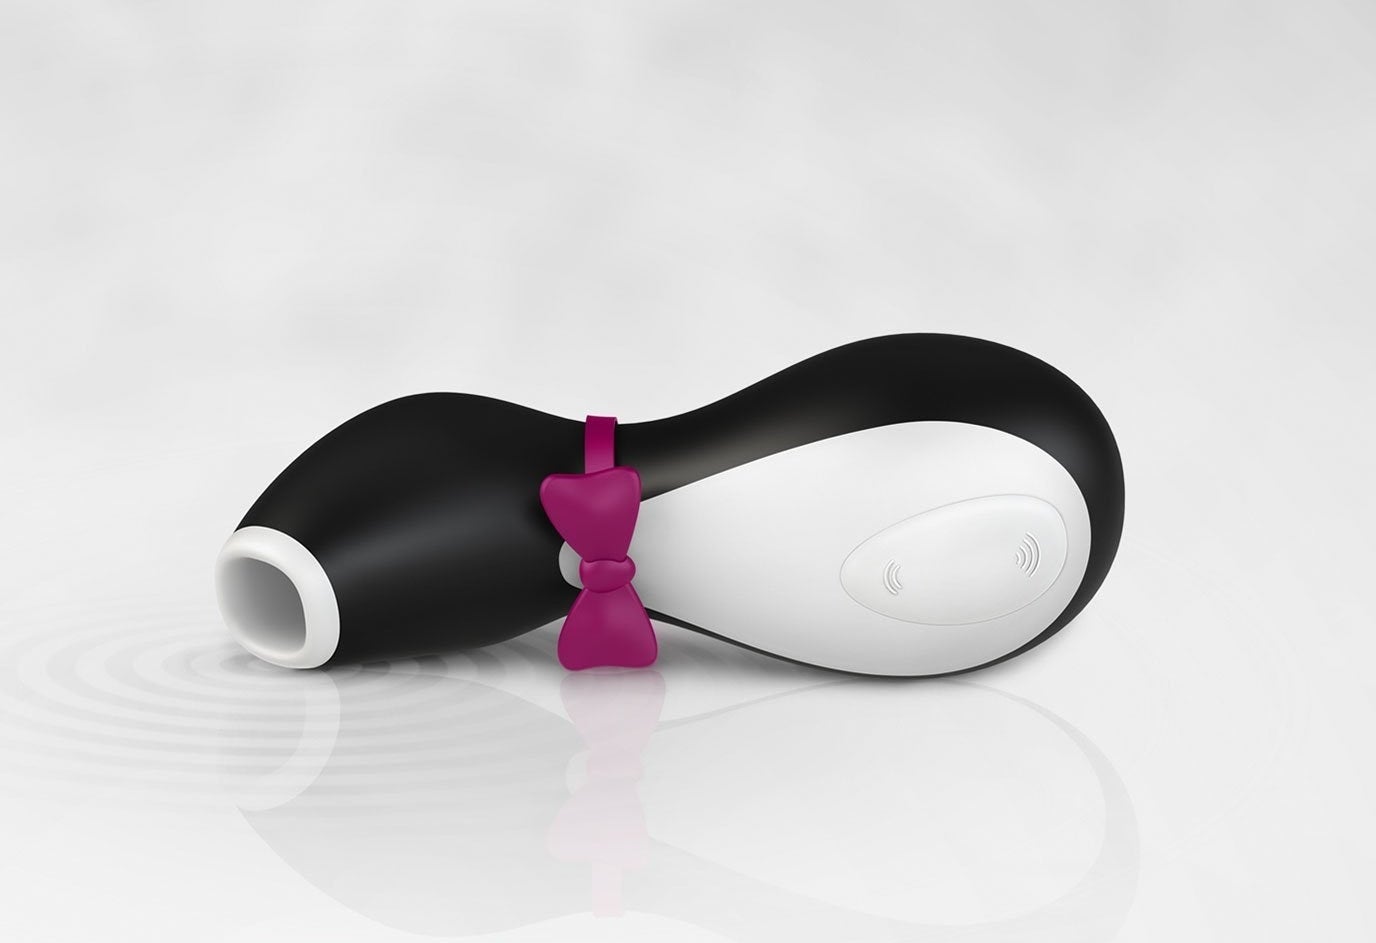 The sex toy on a blank background